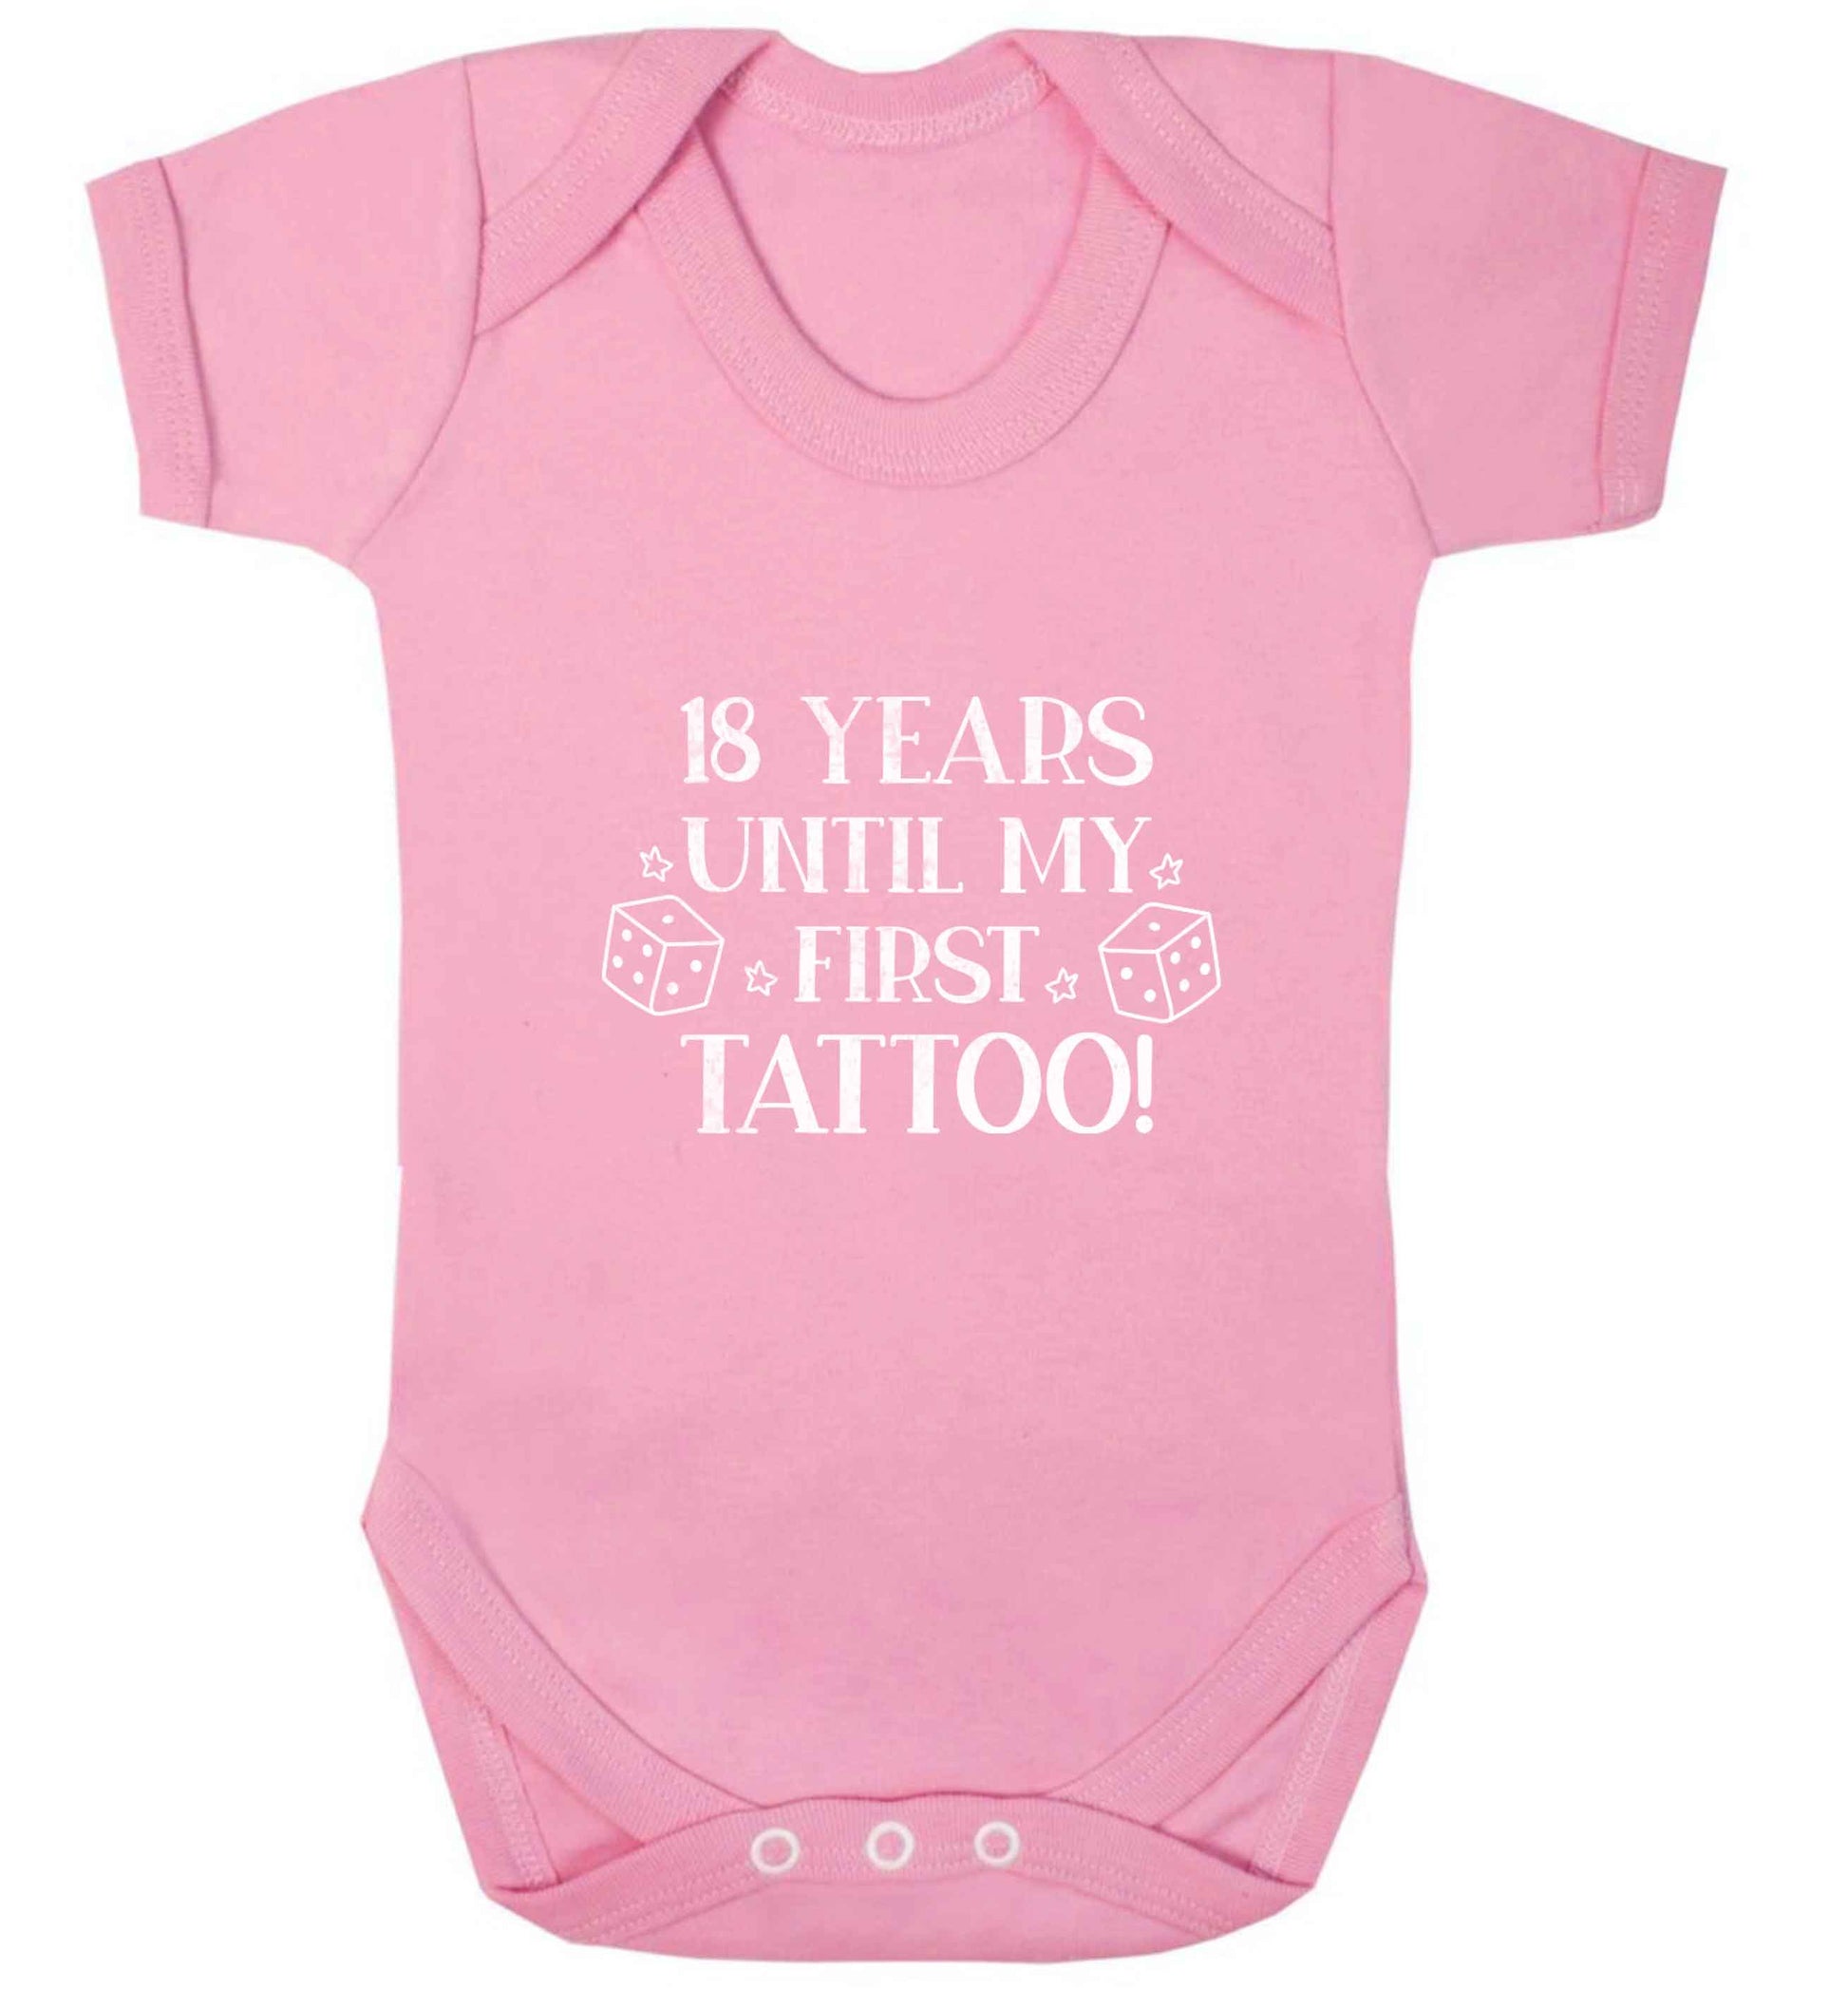 18 Years Until my First Tattoo baby vest pale pink 18-24 months